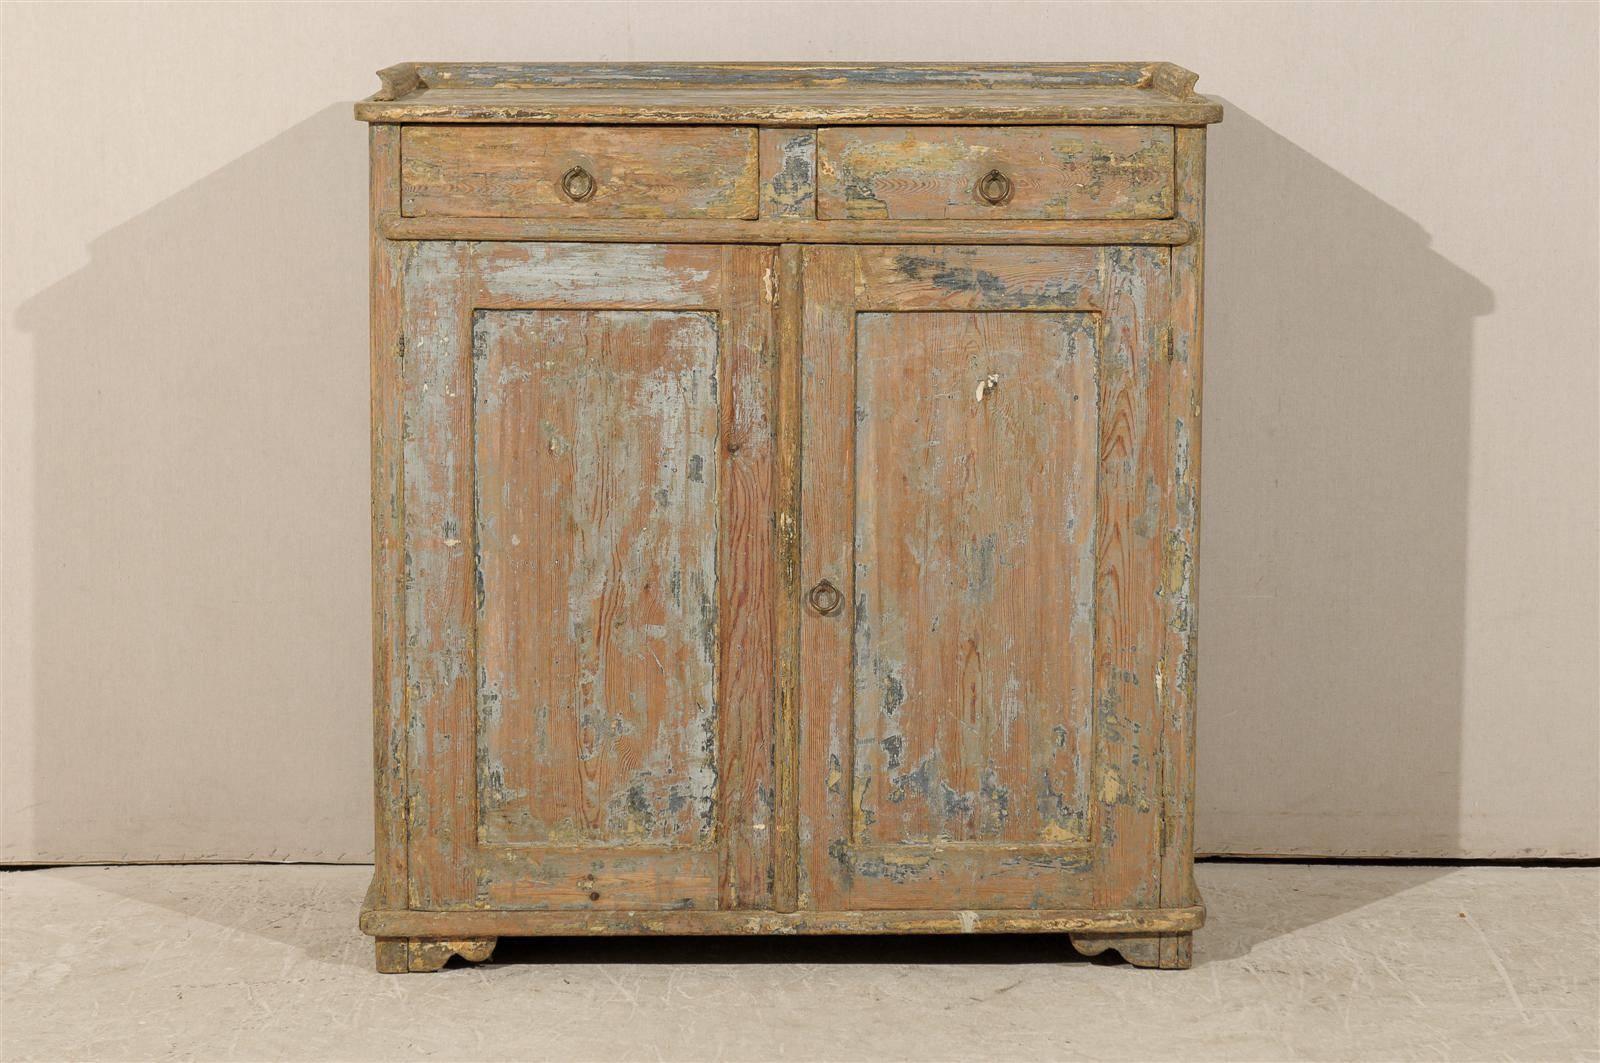 A Swedish 19th century fir wood sideboard. This sideboard features two drawers over two doors. This piece also features cute and subtle bracket feet. This Swedish piece has nice wear throughout, giving it a wonderful antique look.